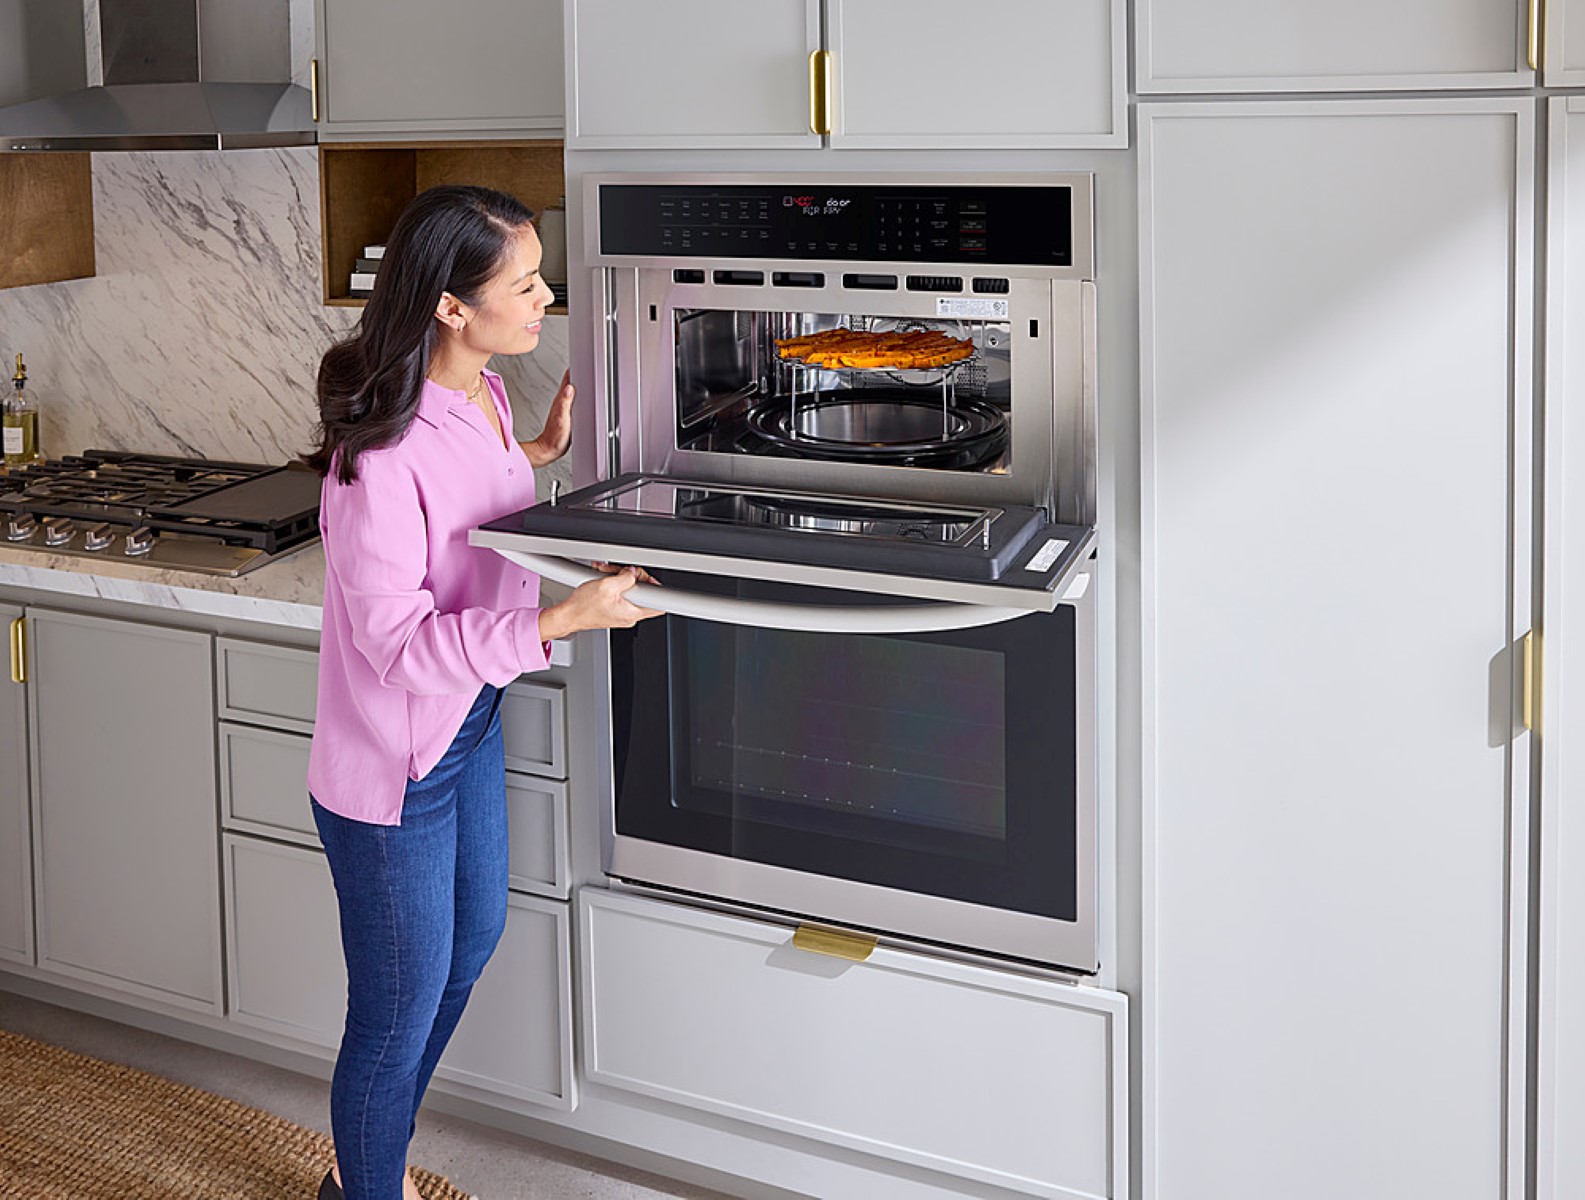 How To Fix The Error Code F-25 For LG Oven